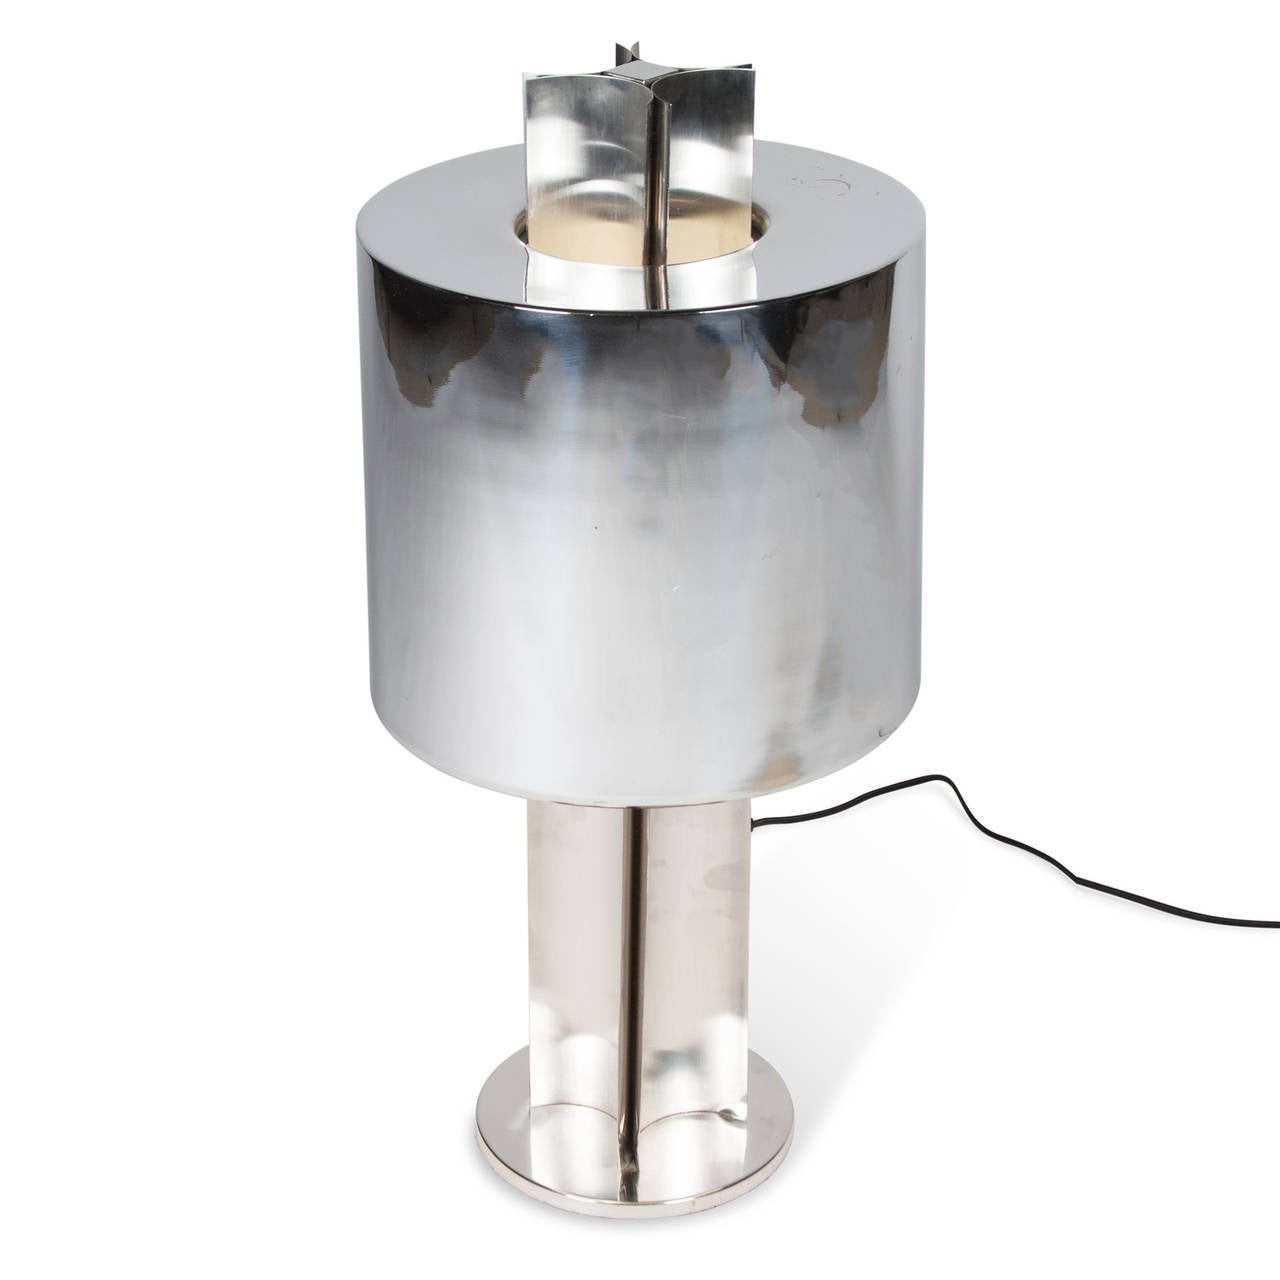 Polished steel table lamp, cylindrical shade mounted to pedestal base formed by an inverted quatrefoil, four bent flanges, French, 1970s. Measures: 8.5” D base, 12.5” D shade at widest, 27” H.

